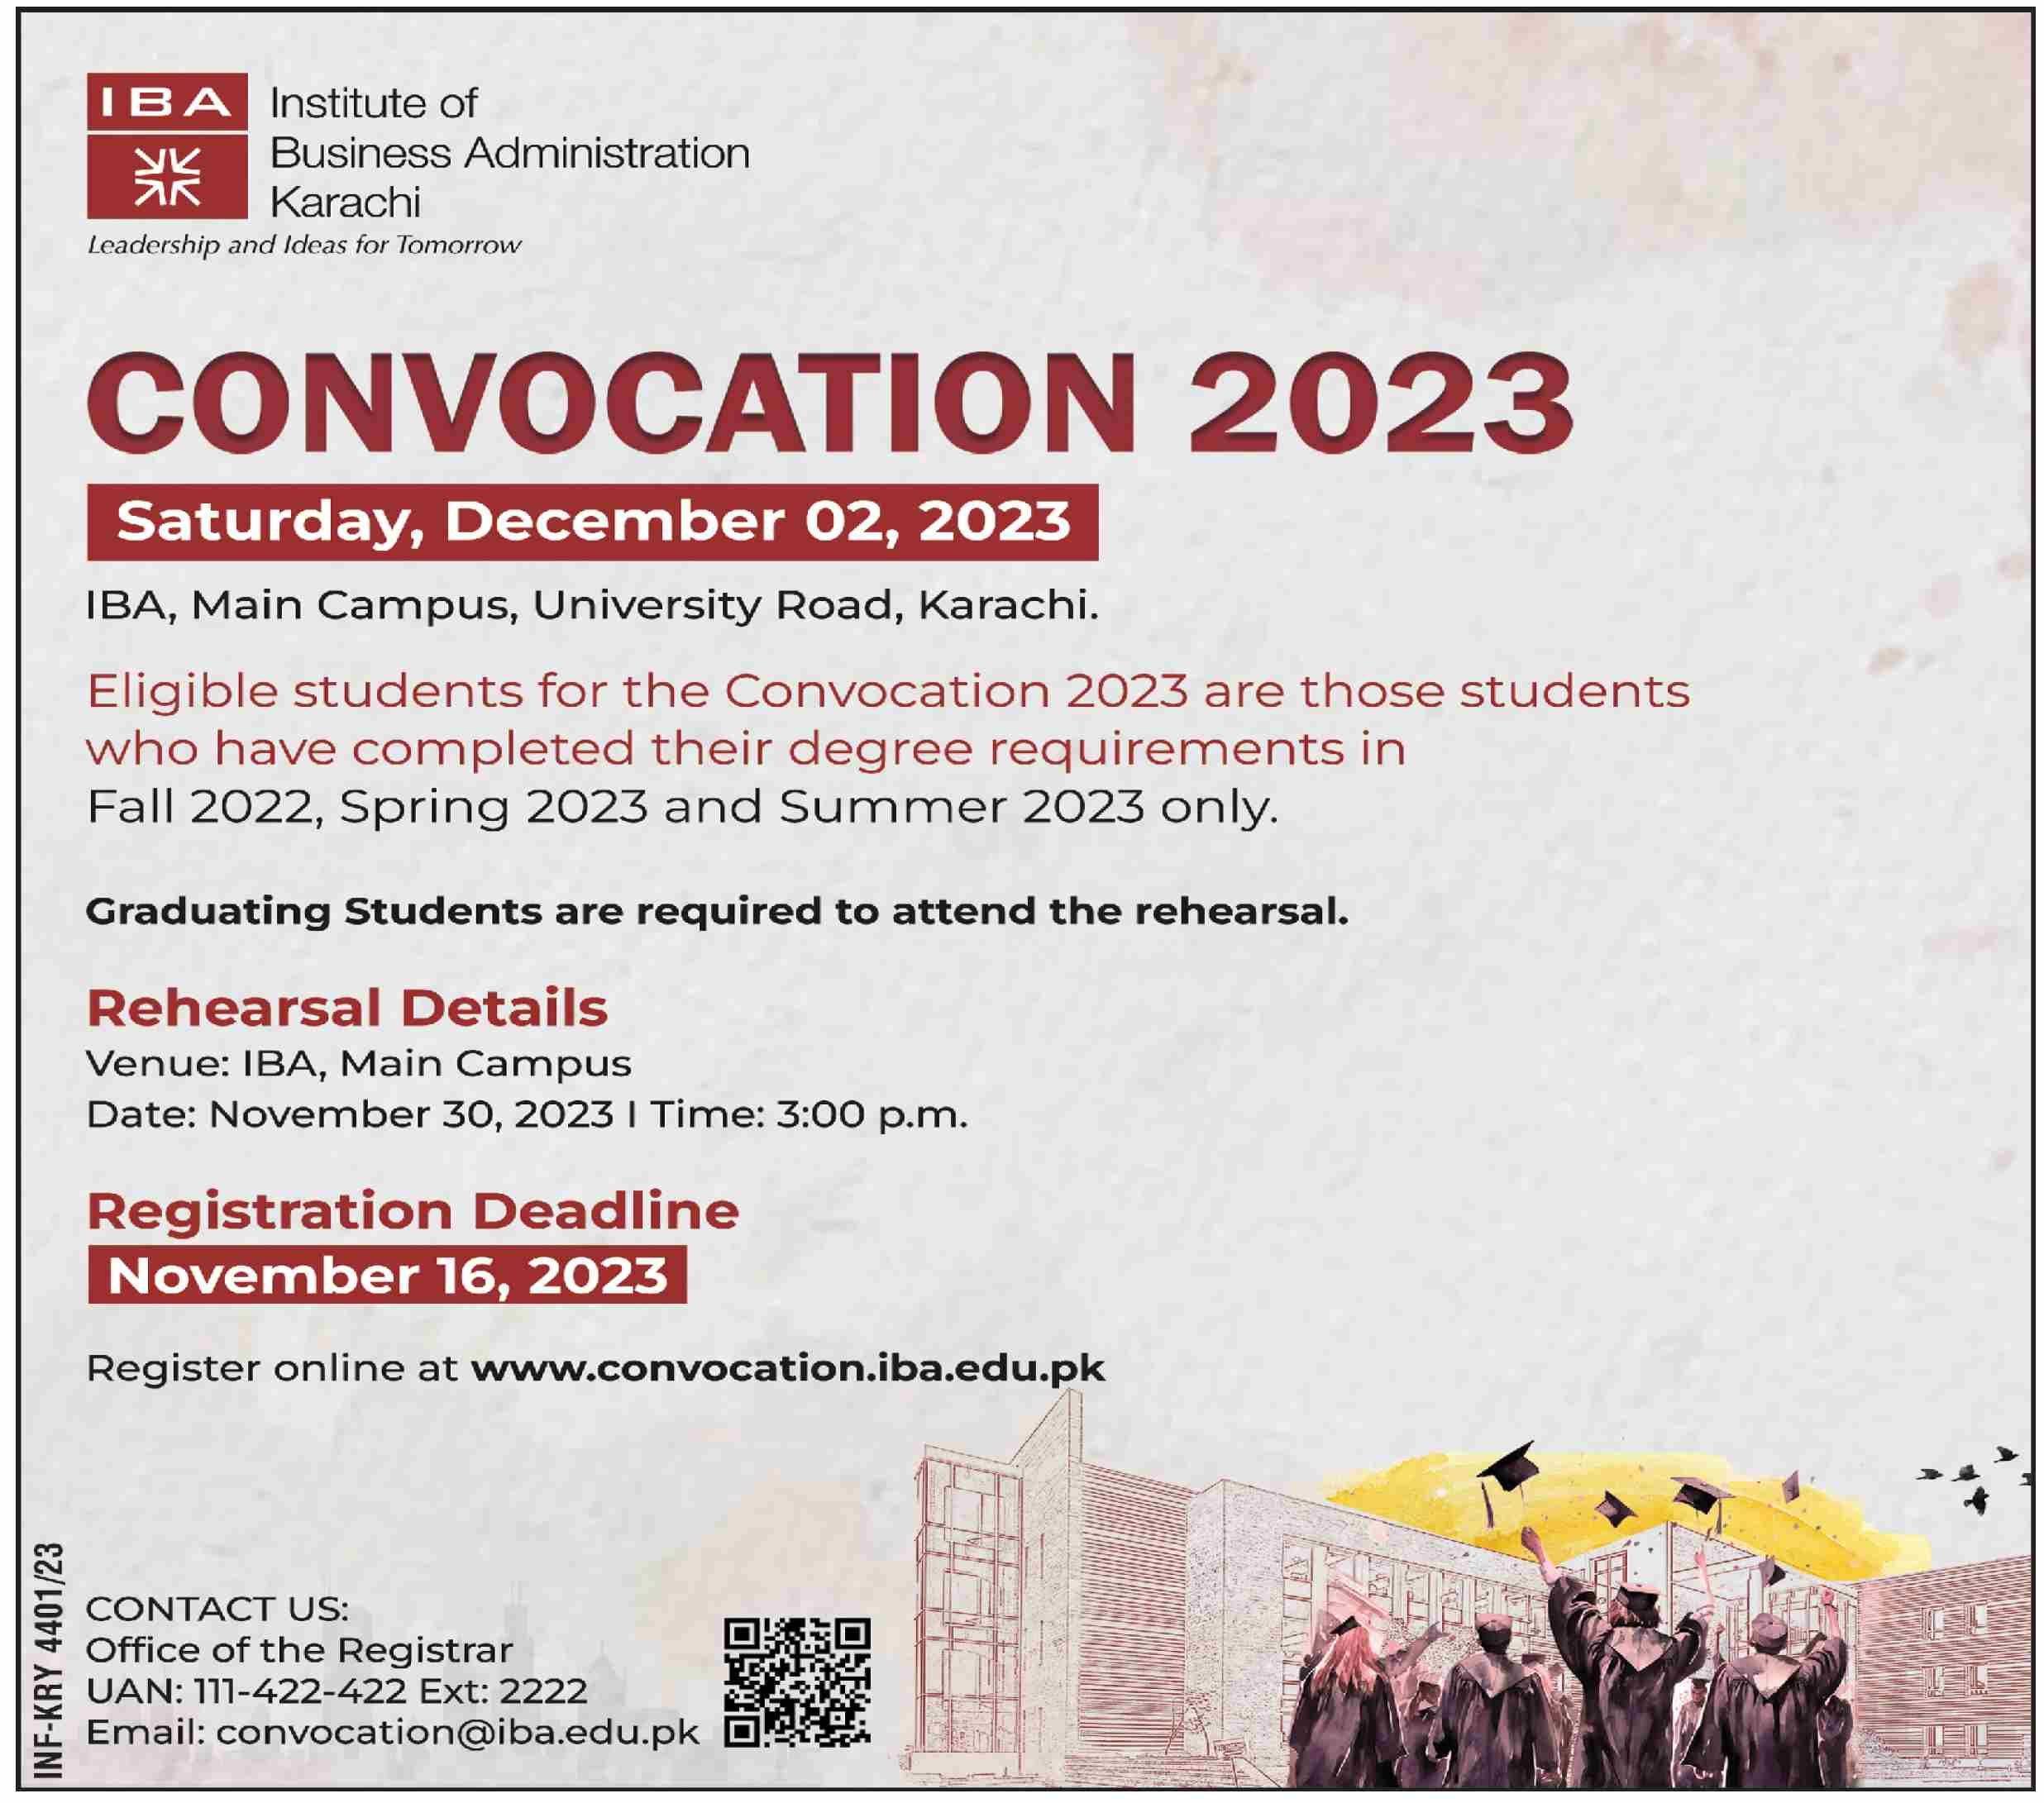 IBA Institute of Business Administration Karachi Convocation 2023 detail